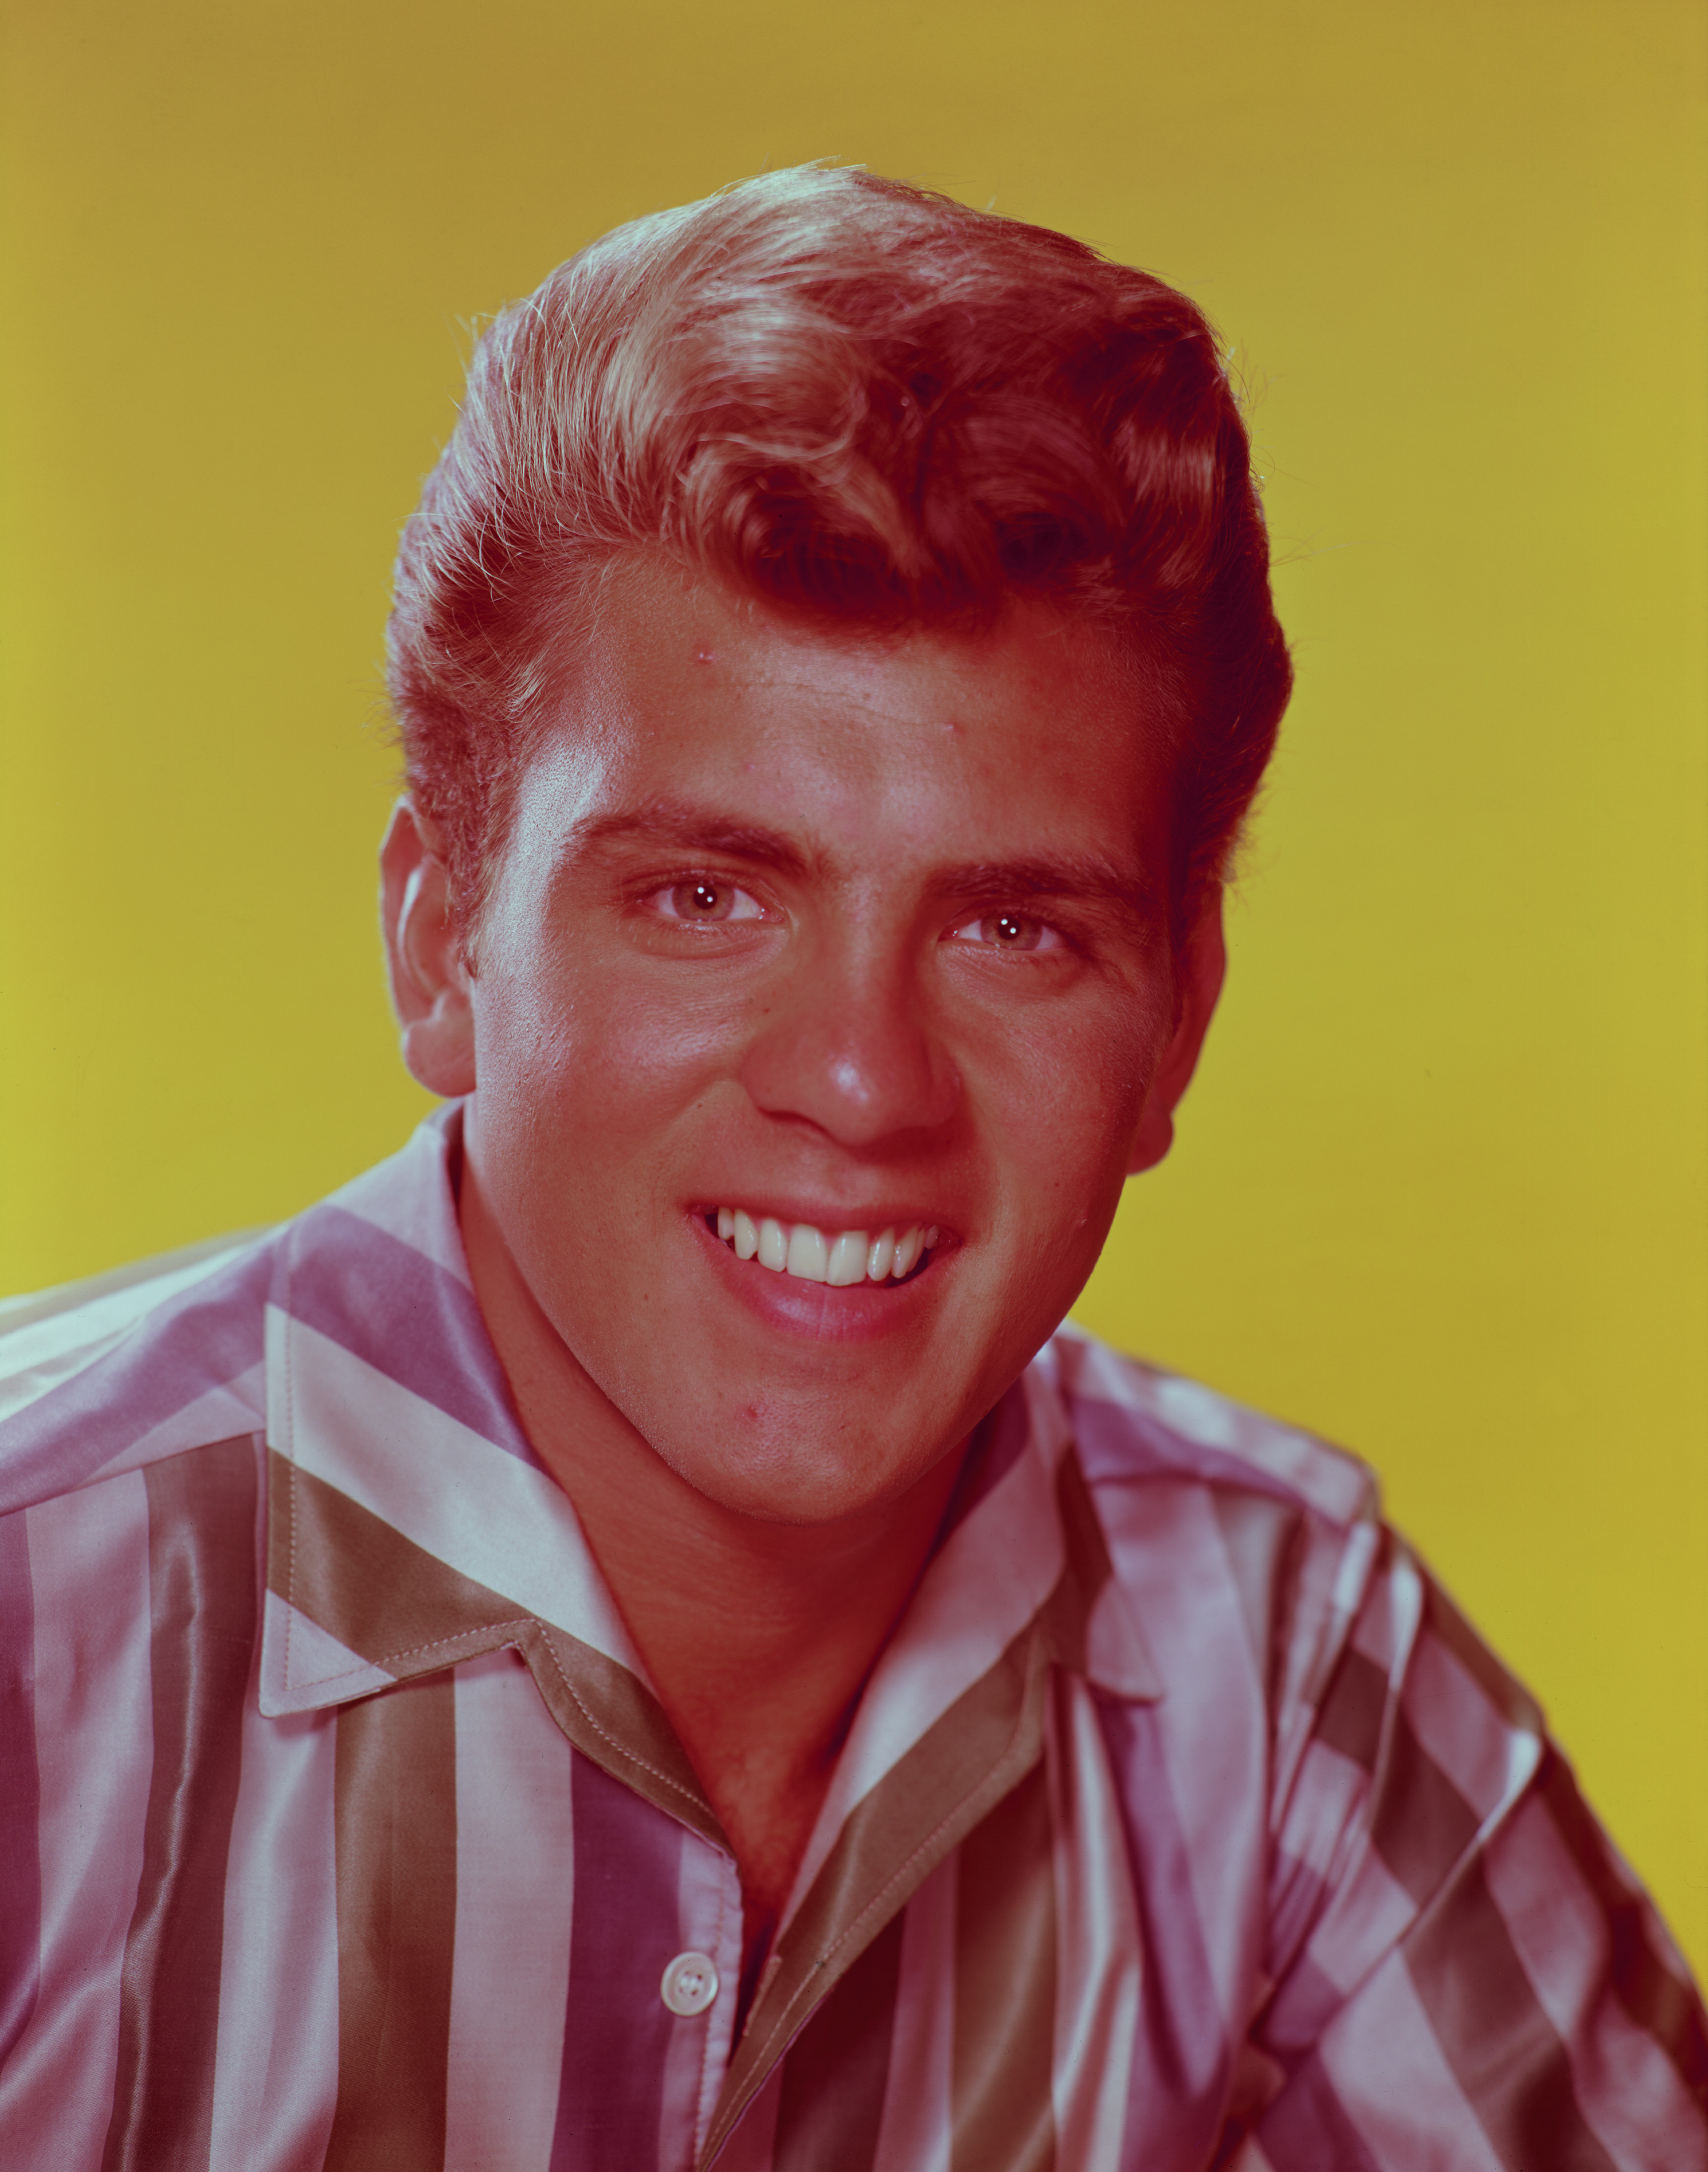 American actor and singer, and popular teen idol Fabian Forte, circa 1960. | Source: Getty Images